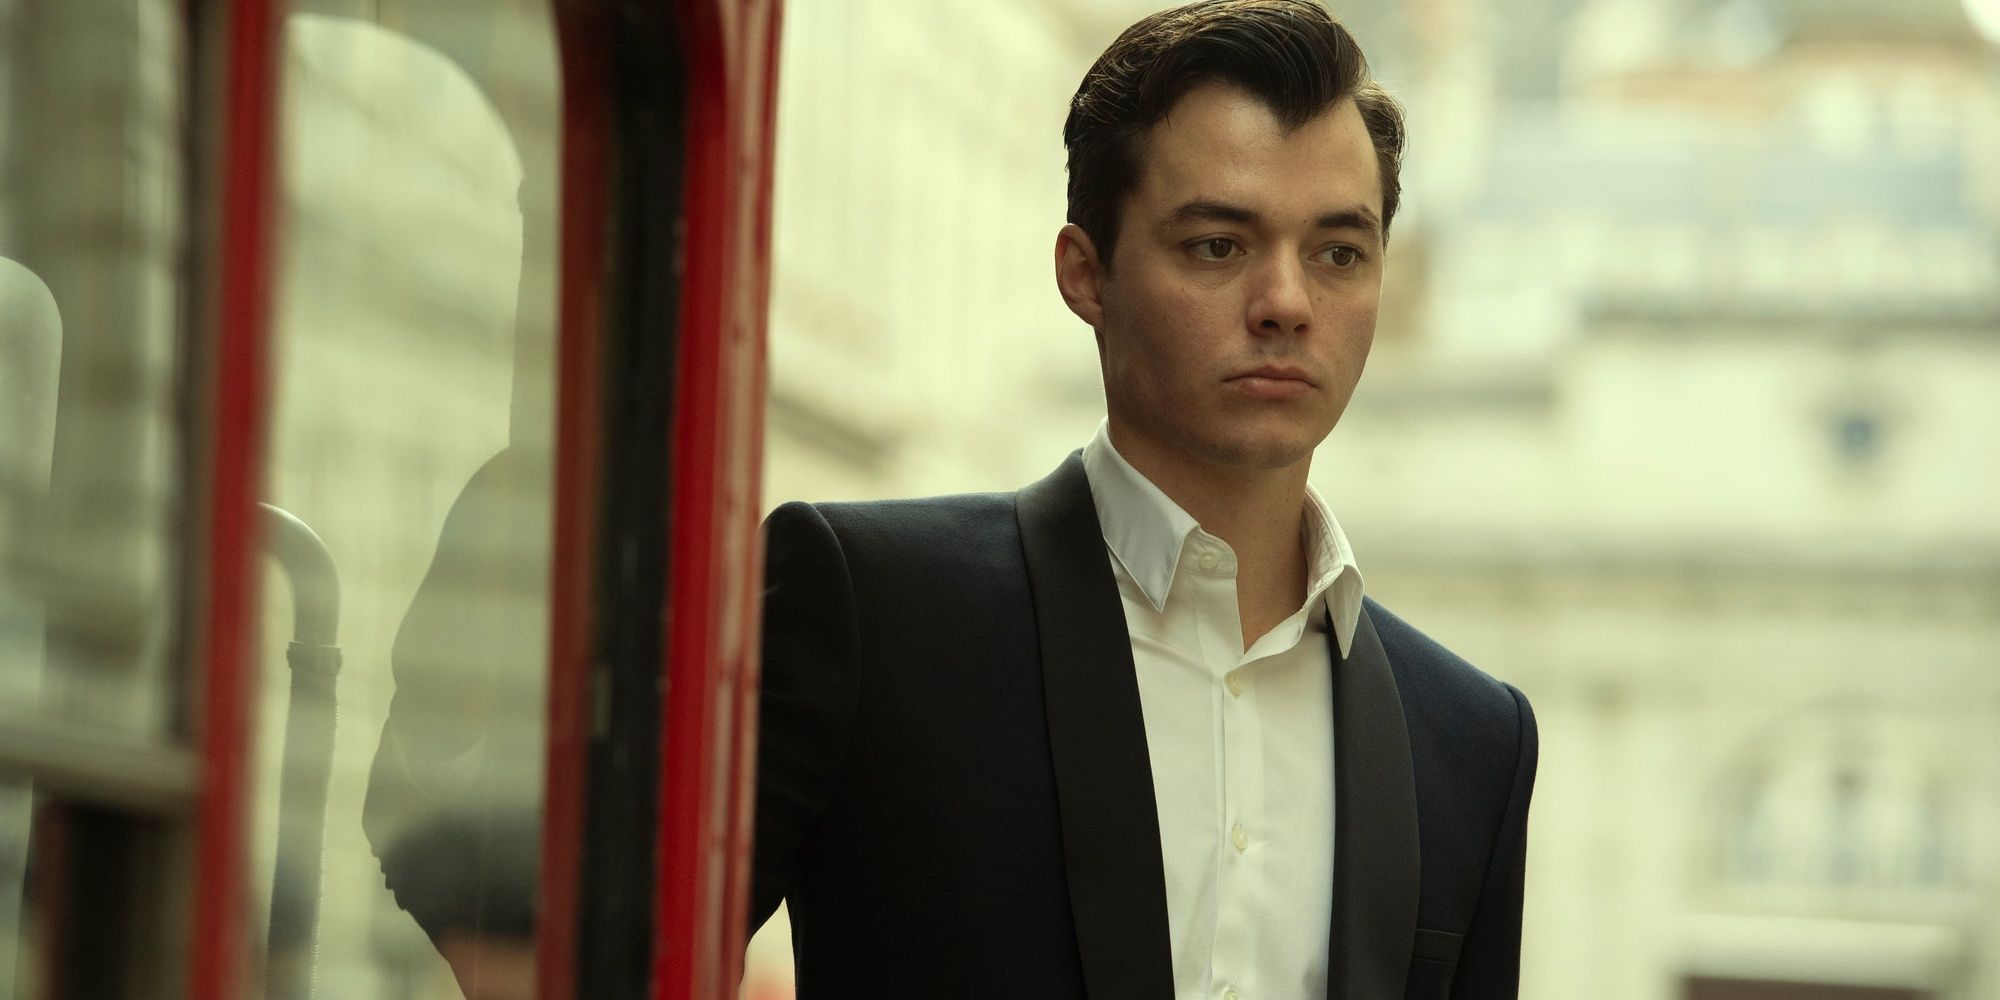 pennyworth-show-hbo Cropped